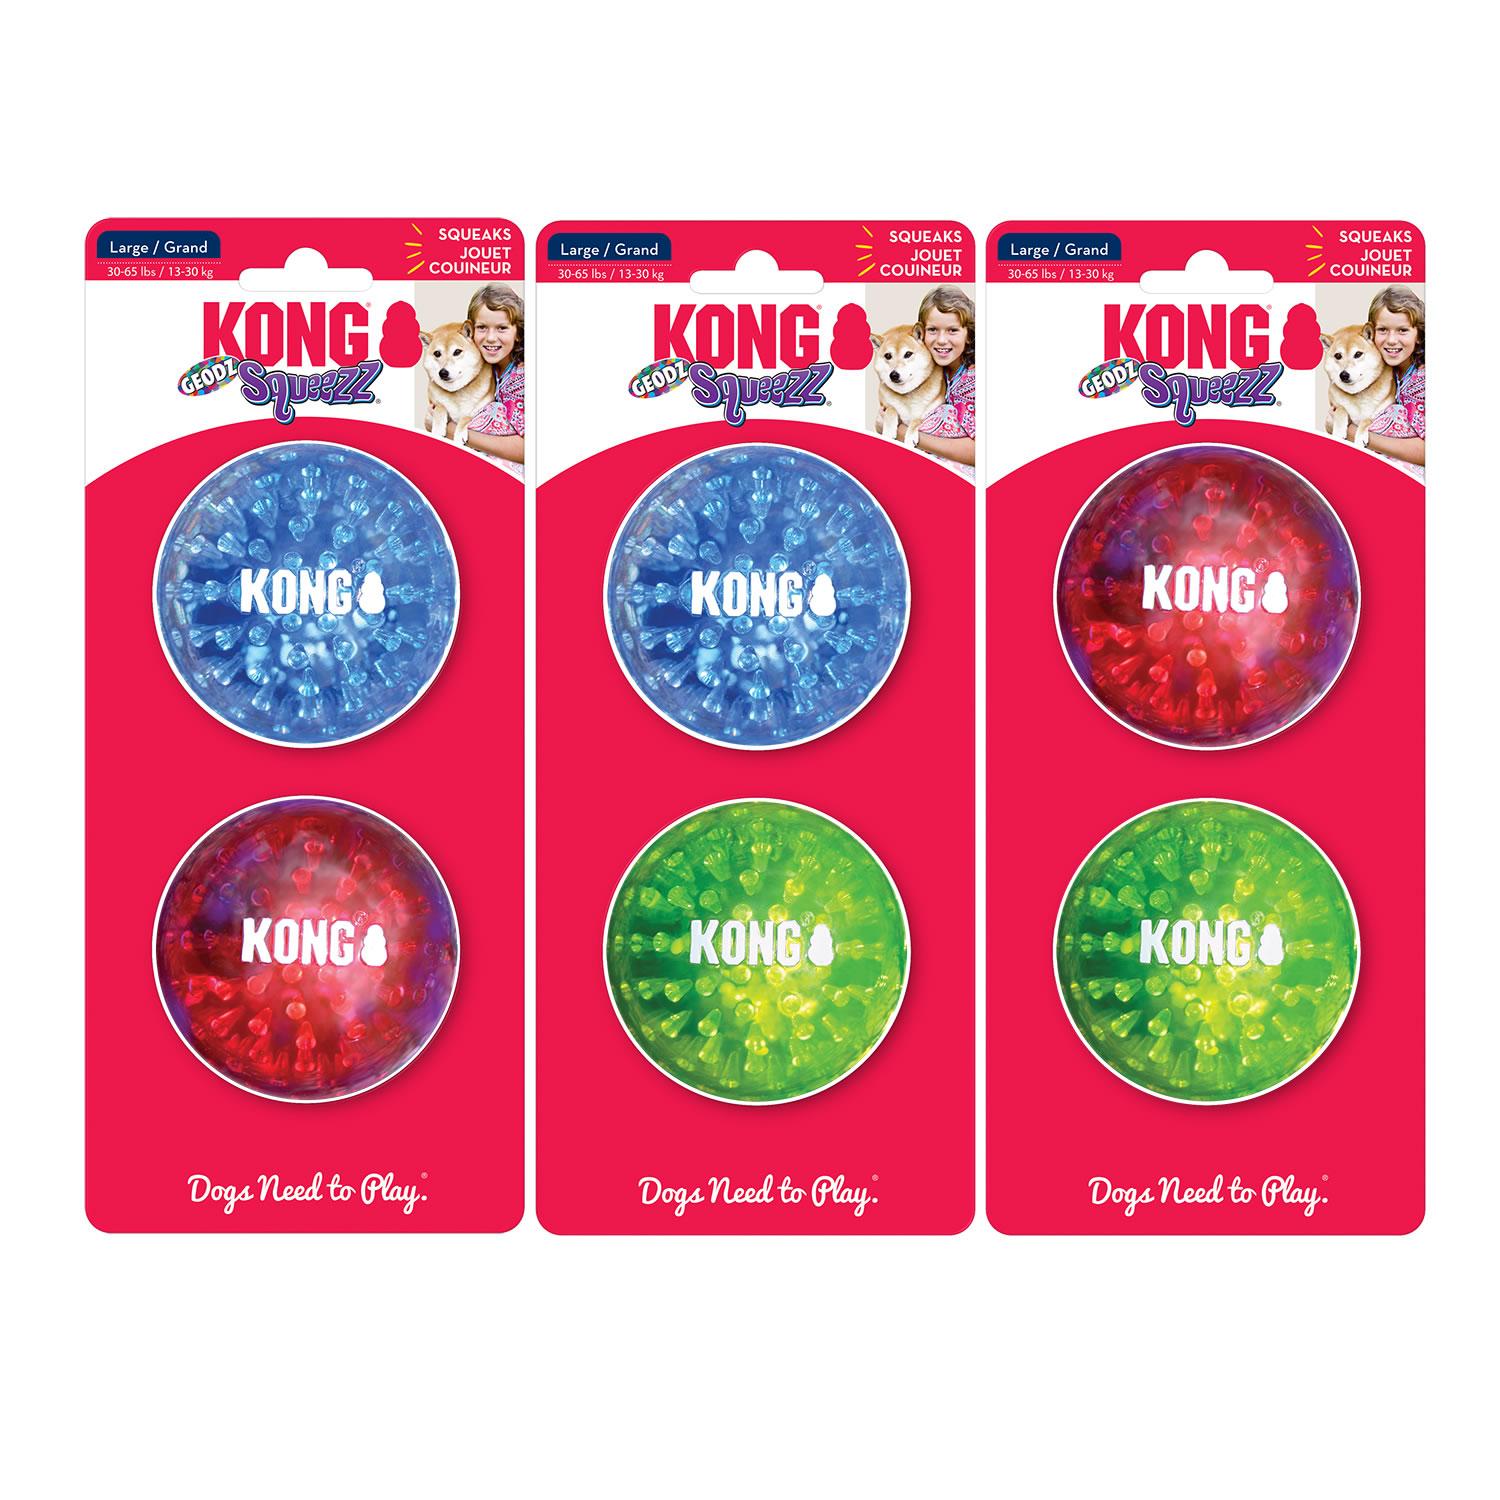 KONG SQUEEZZ GEODZ LARGE  2 PACK